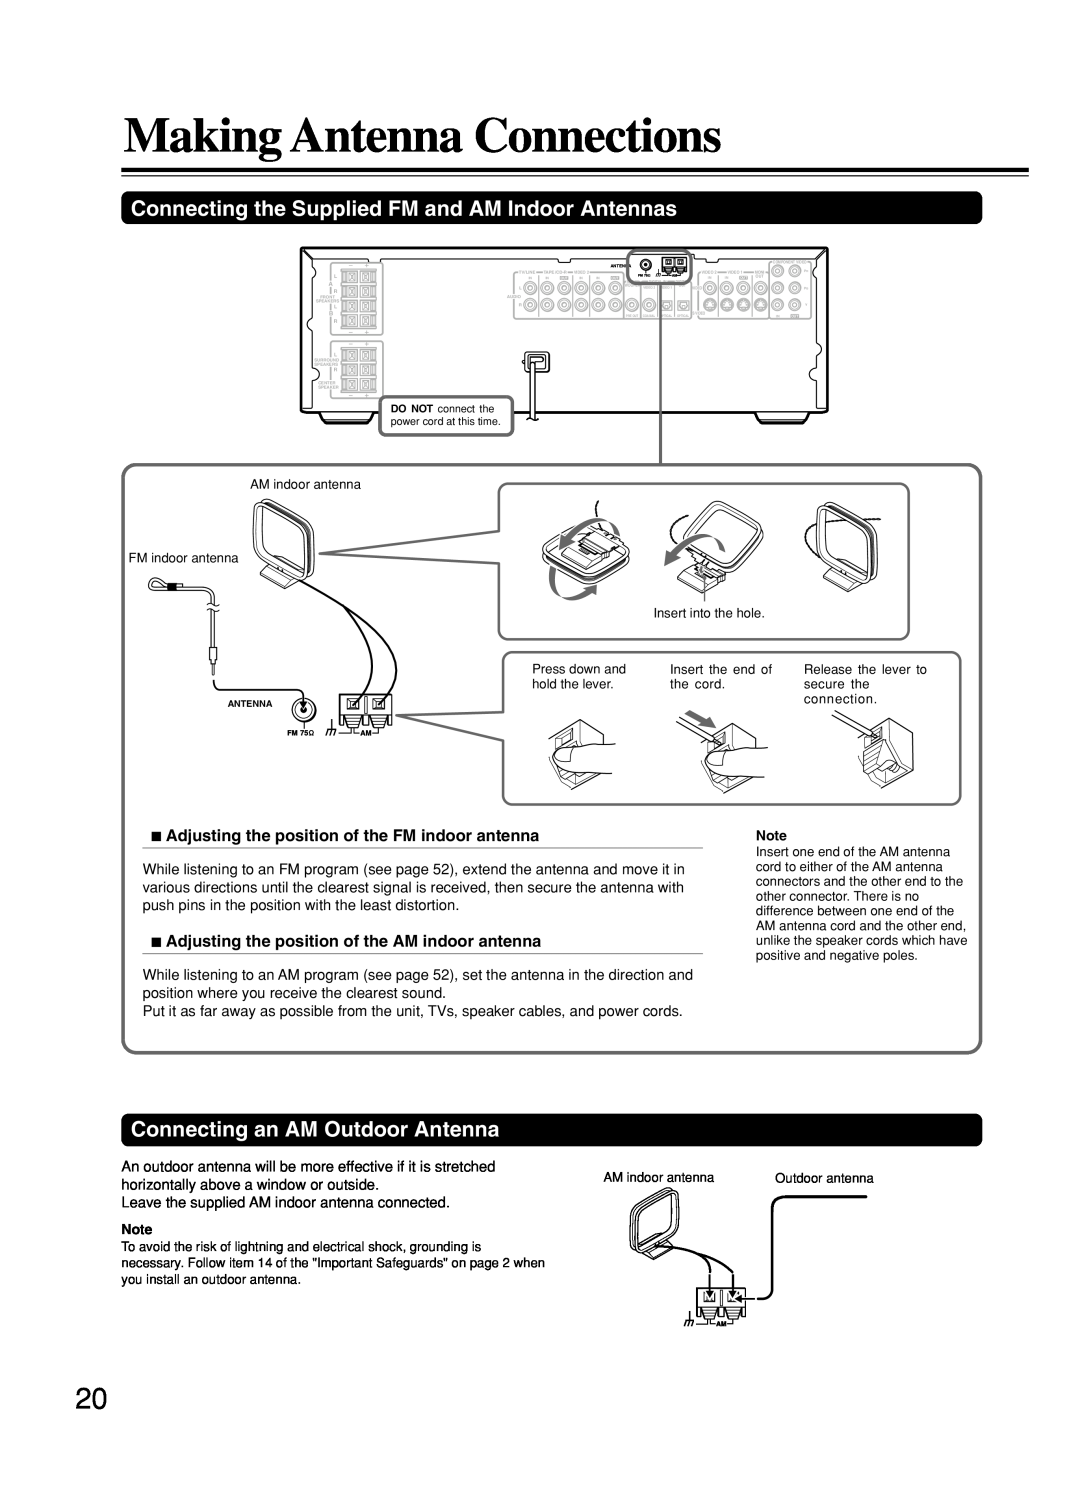 Onkyo DR-C500 instruction manual Making Antenna Connections, Connecting the Supplied FM and AM Indoor Antennas 